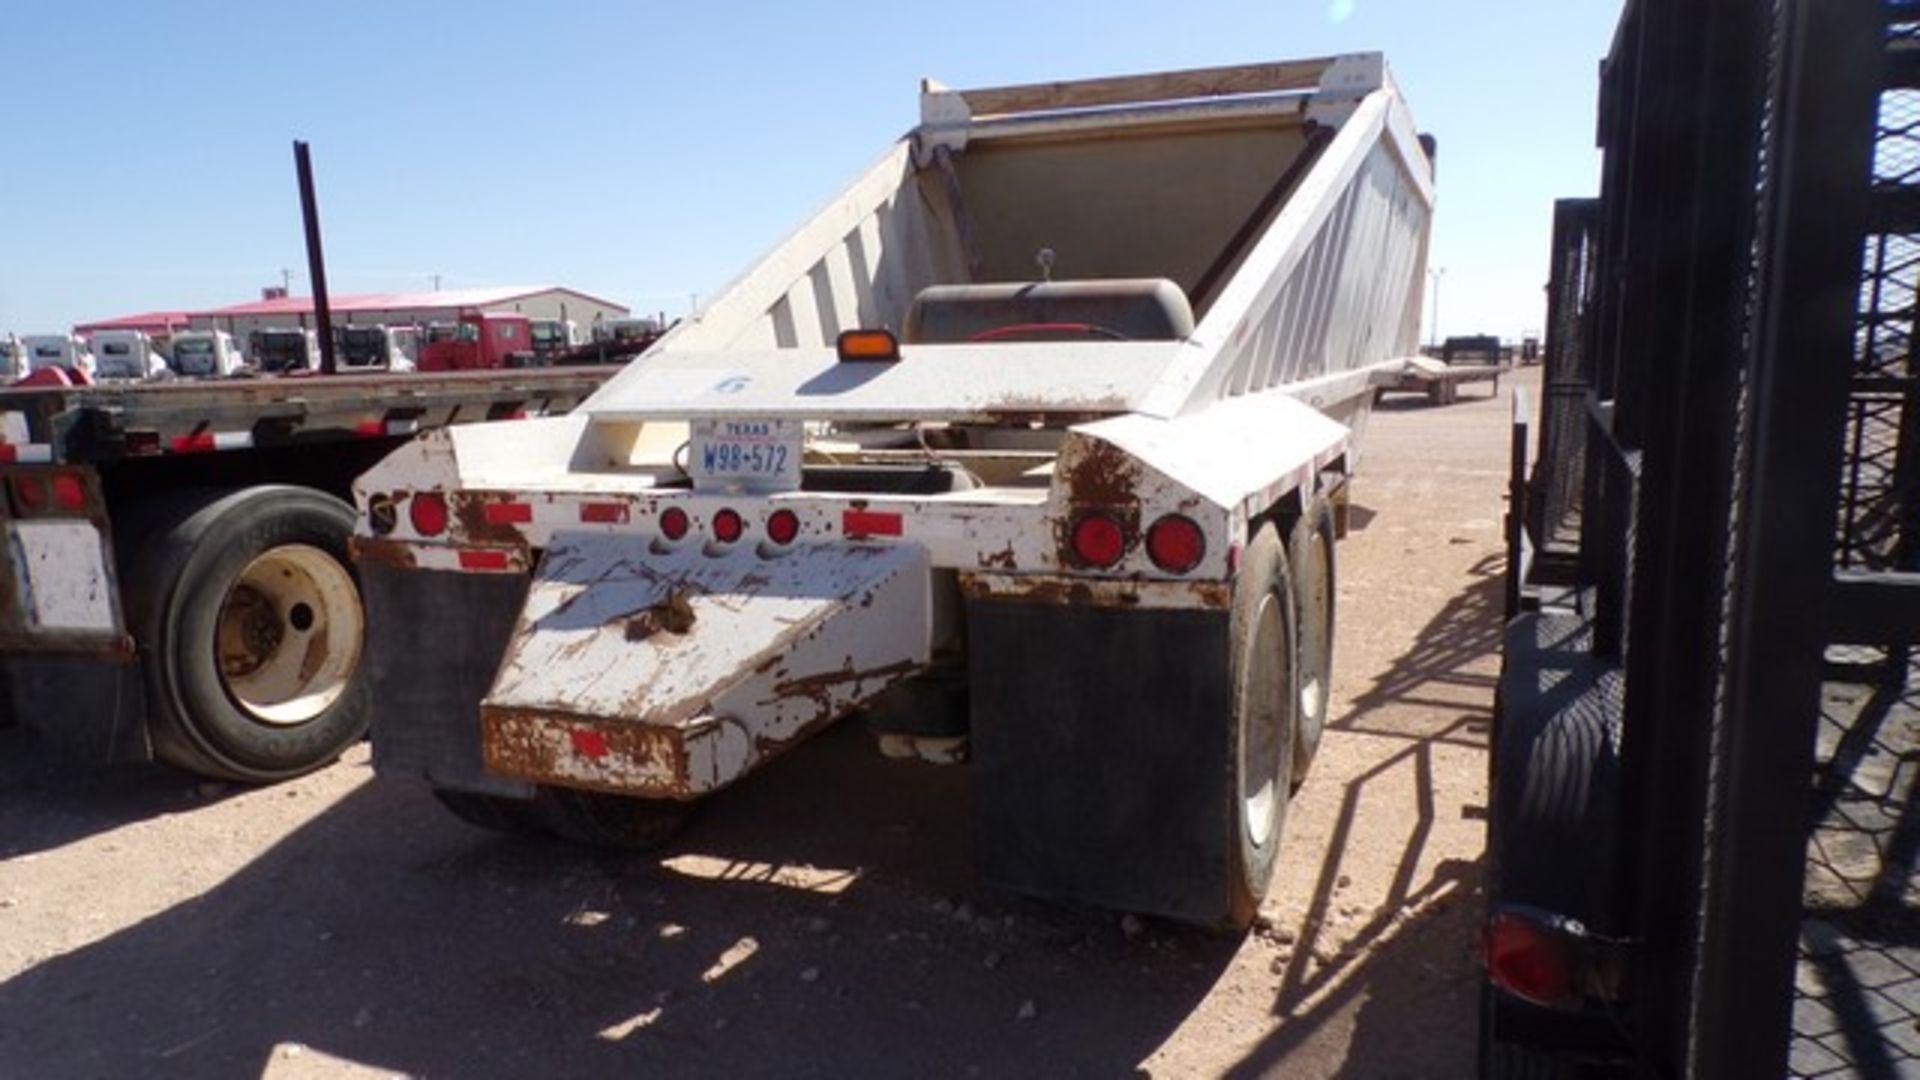 Located in YARD 1 - Midland, TX (2355) (X) 2007 CONSTRUCTION TRAILER SPECIALIST T/A BDT40 BELLY DUMP - Image 5 of 5